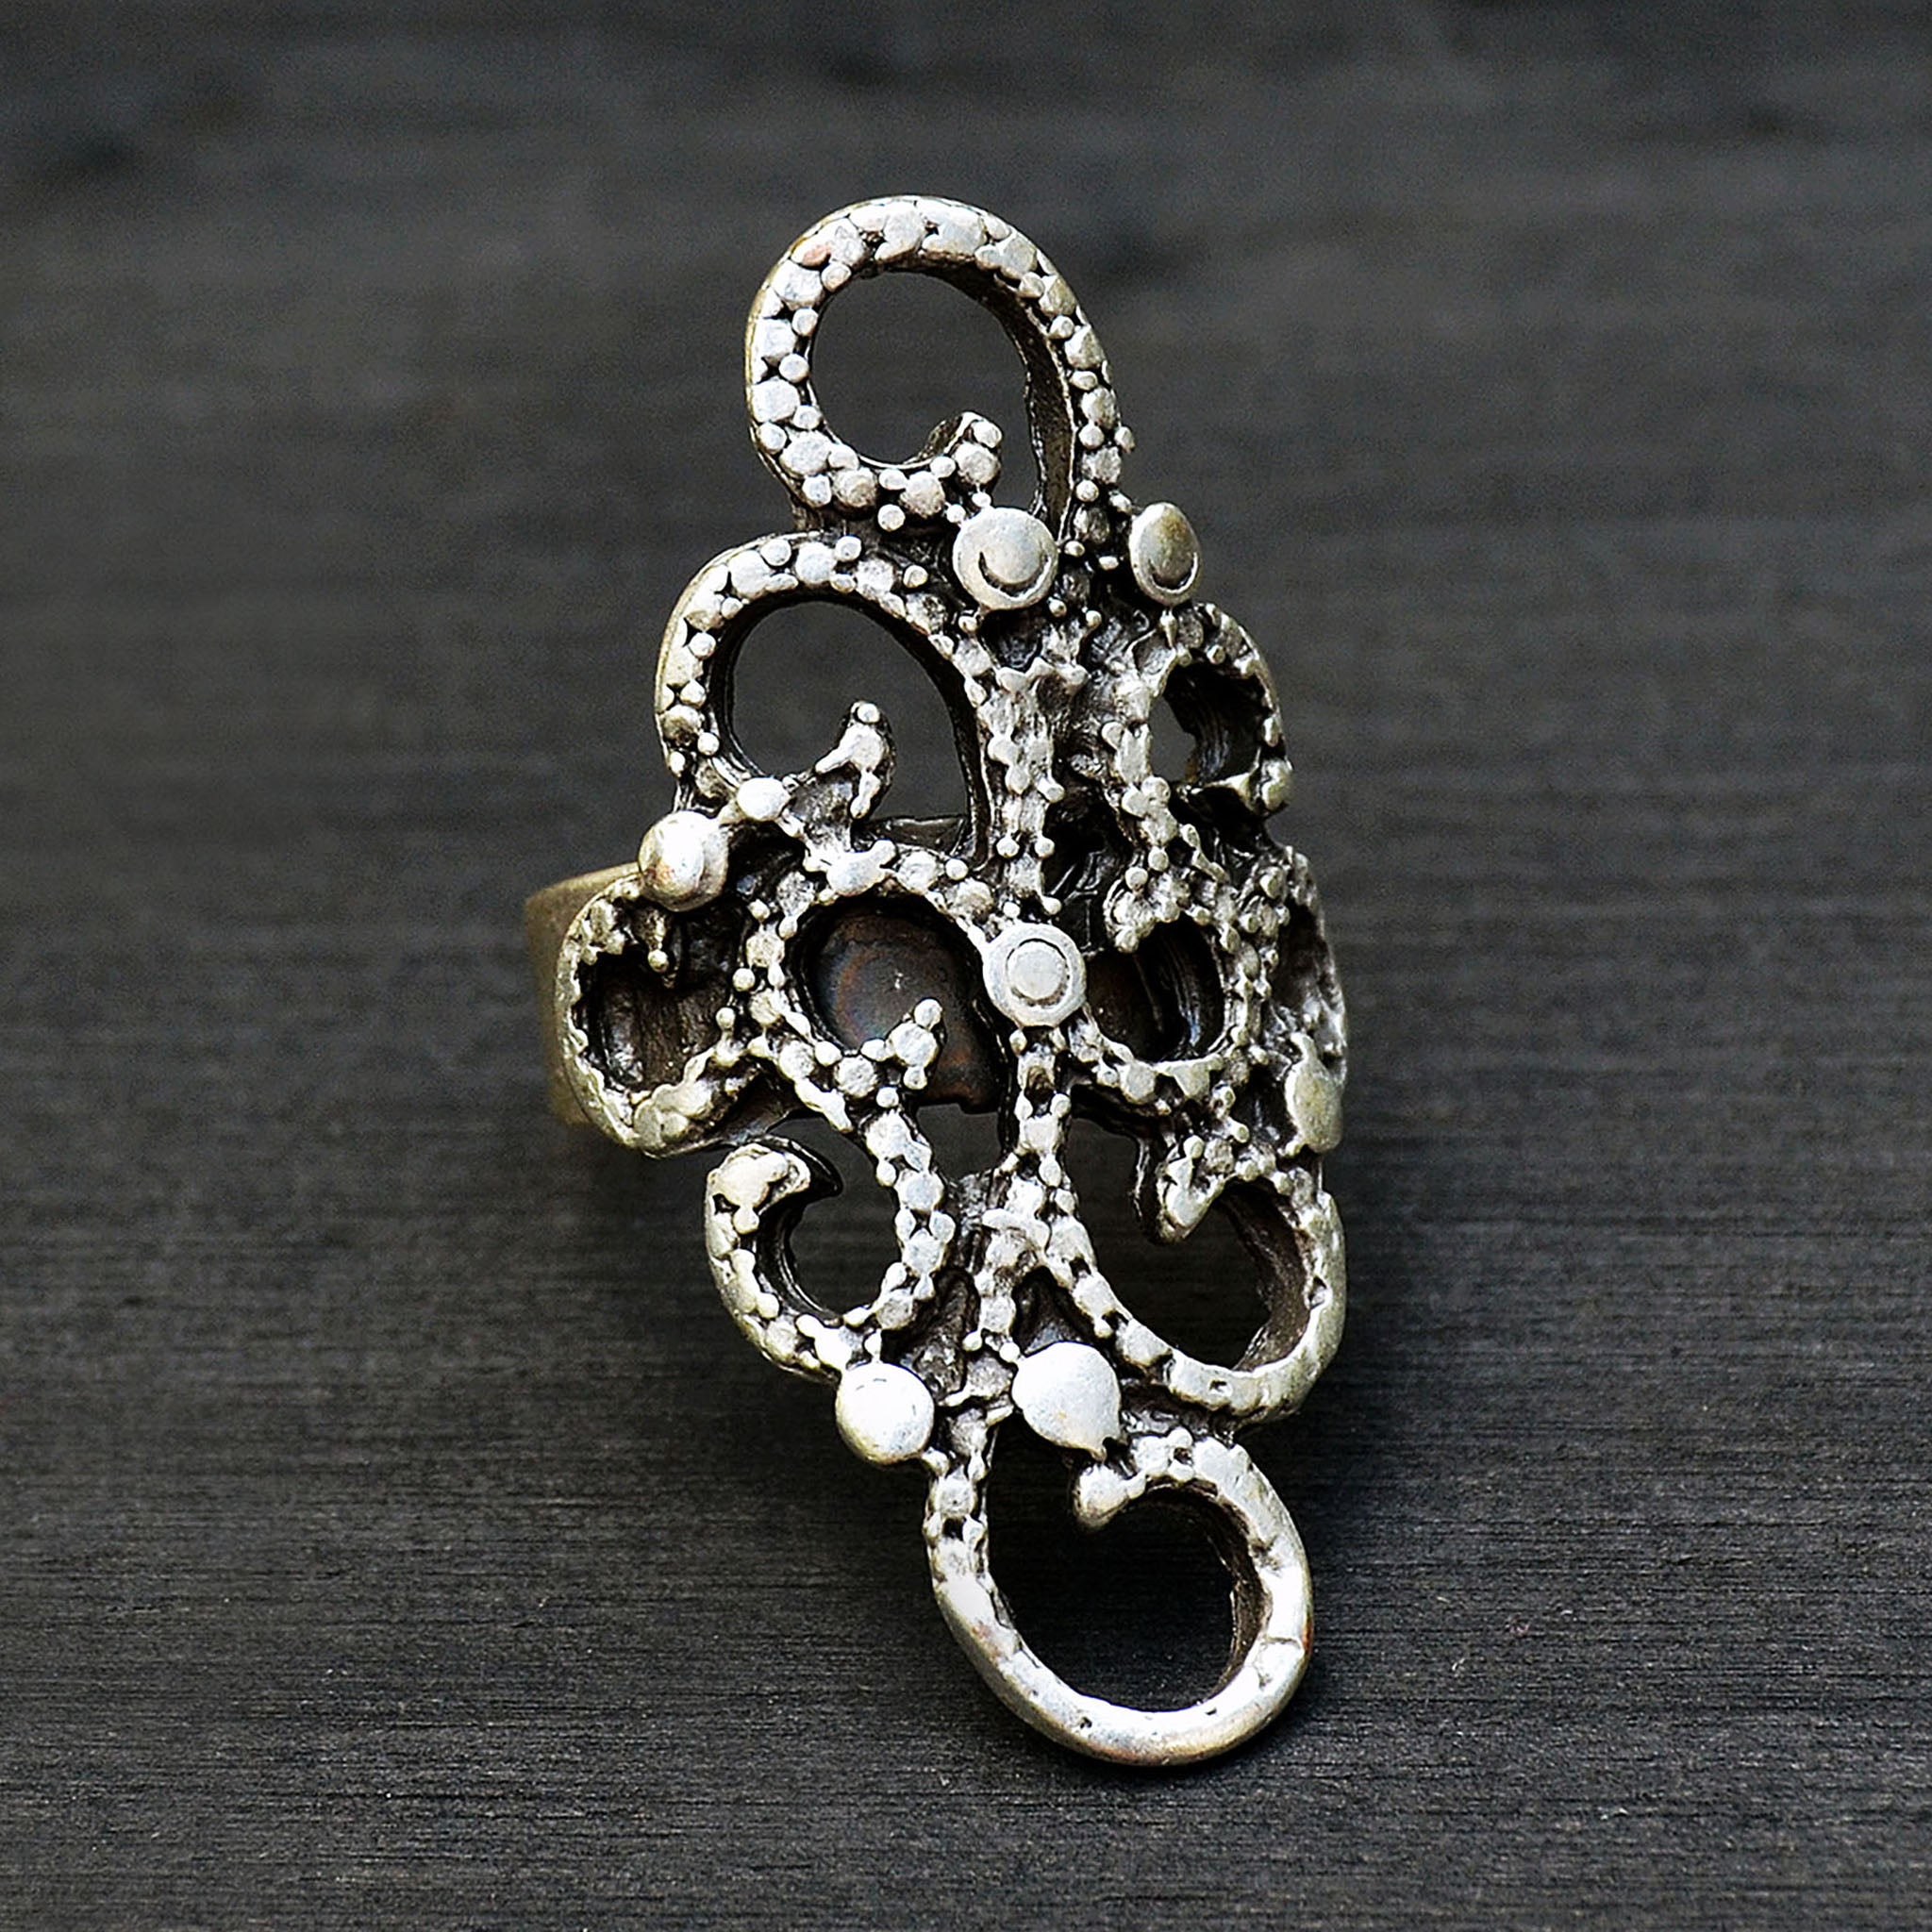 Large silver filigree gothic ring